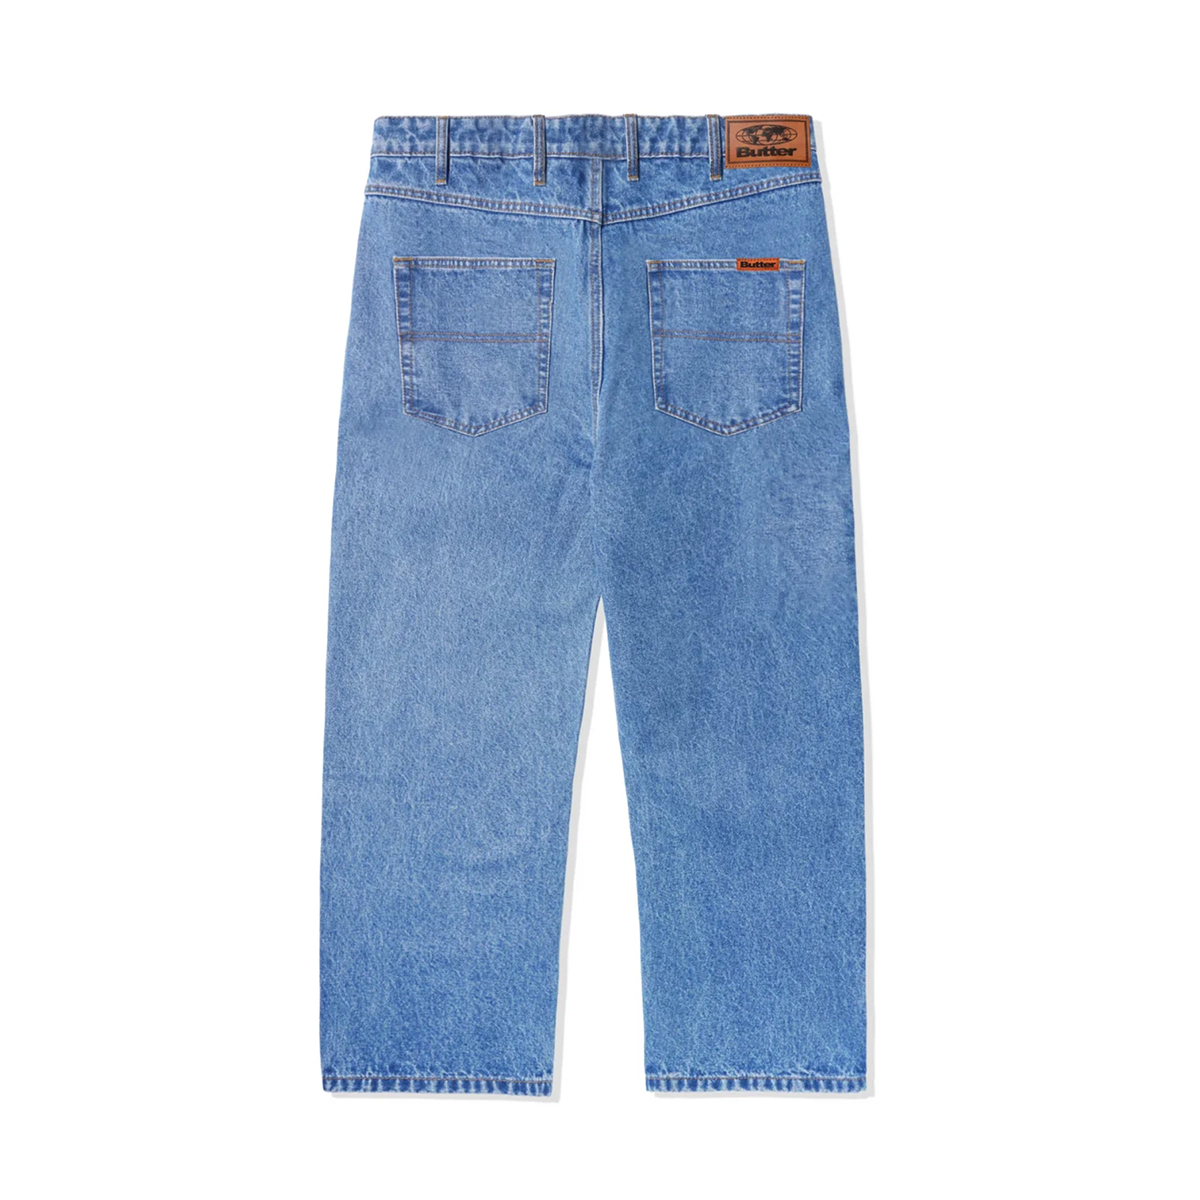 Butter Relaxed Denim Jeans - Washed Indigo